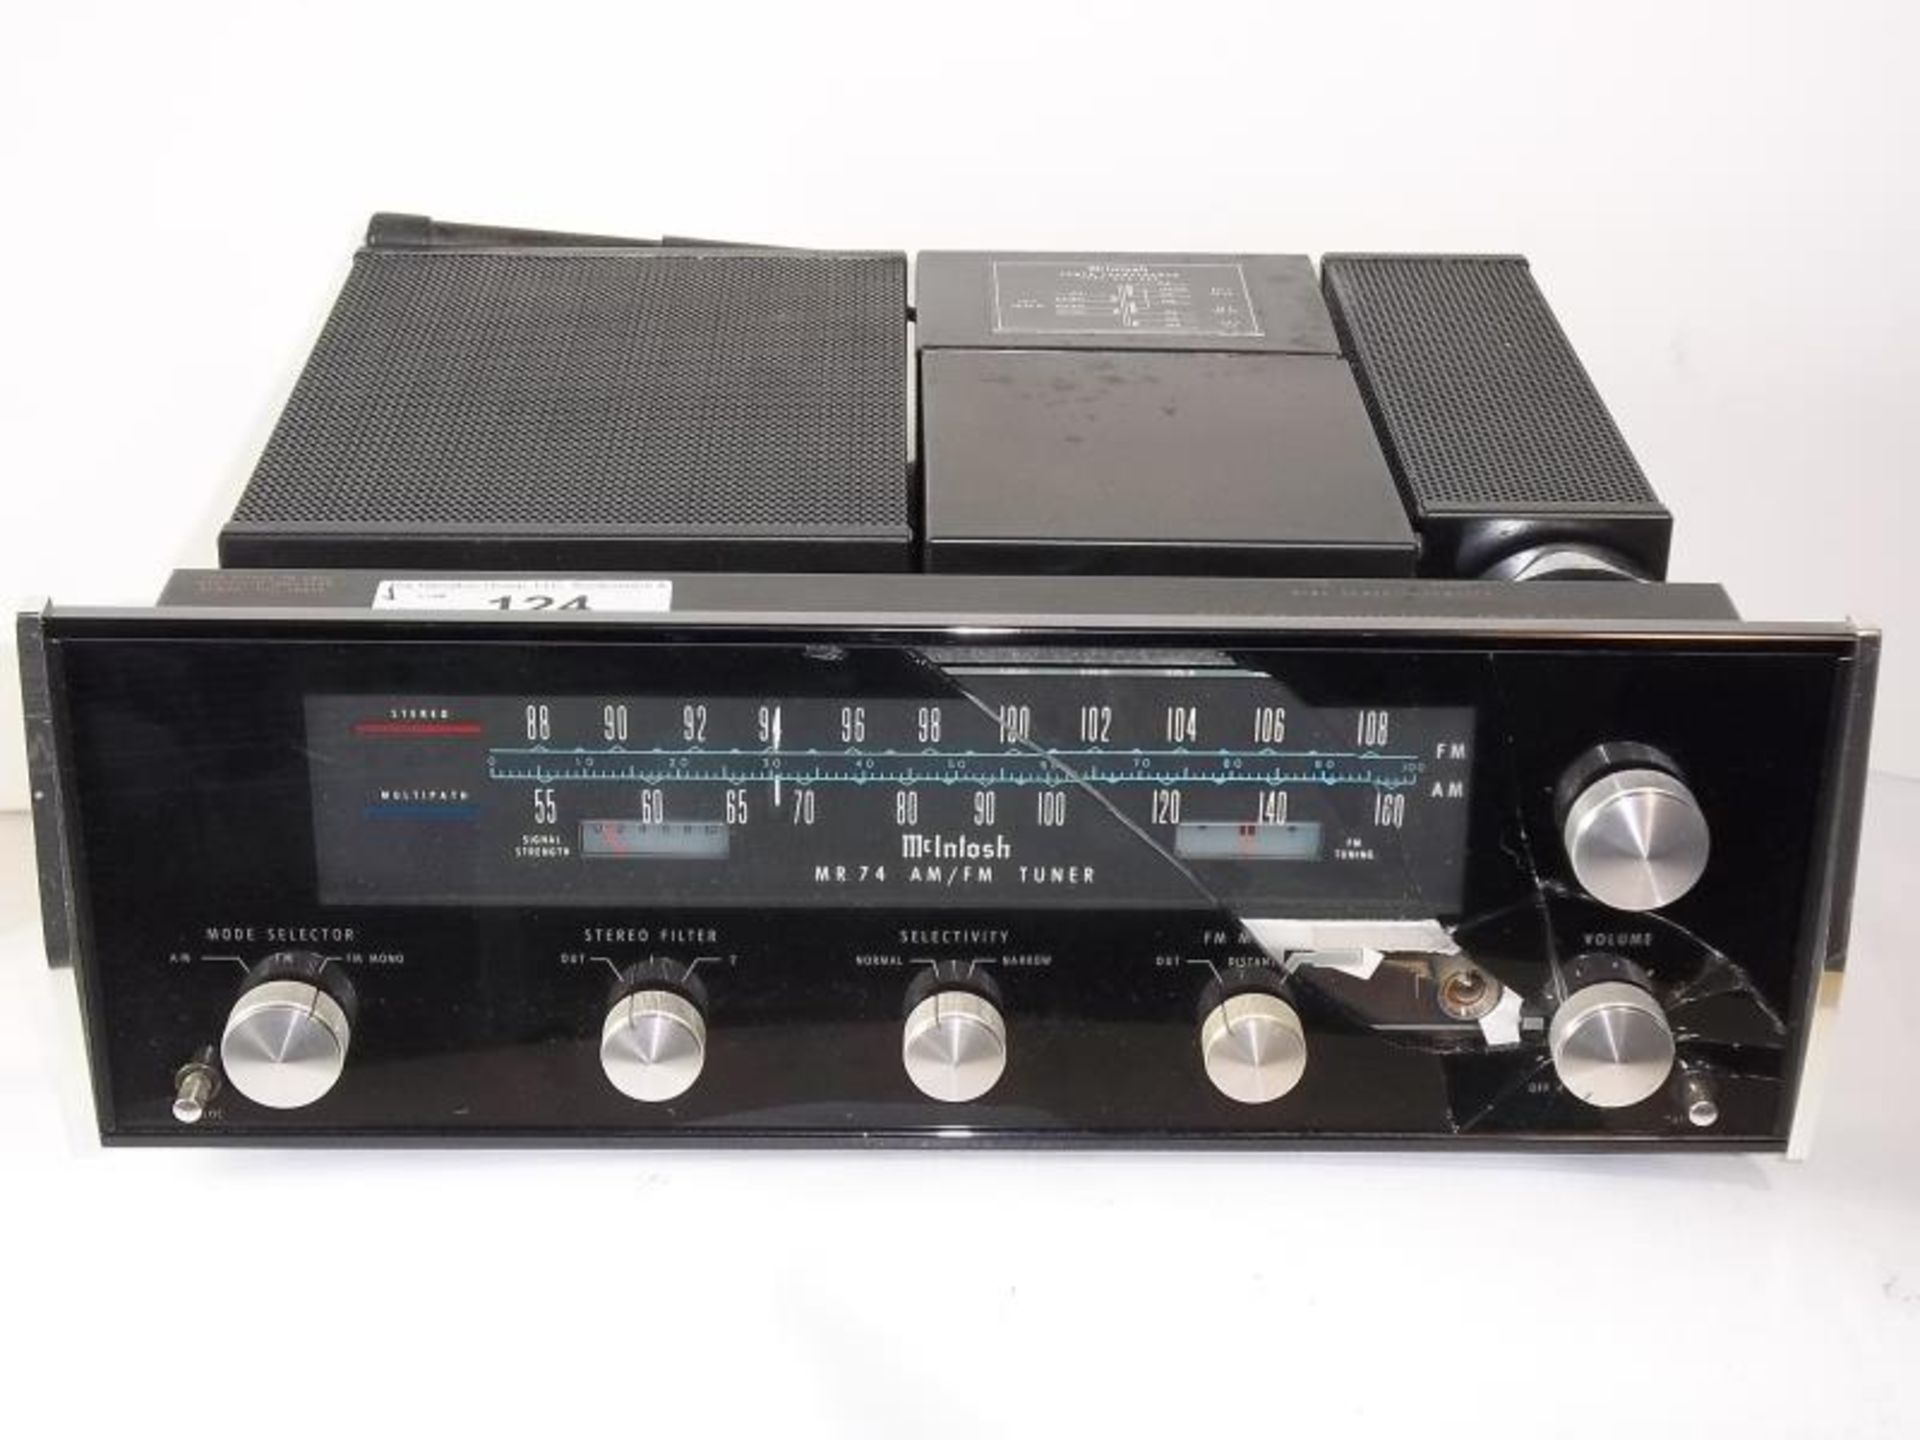 McIntosh MR-74 Stereophonic AM FM Tuner, no case, broken front glass, s # AC2852, tested - powers